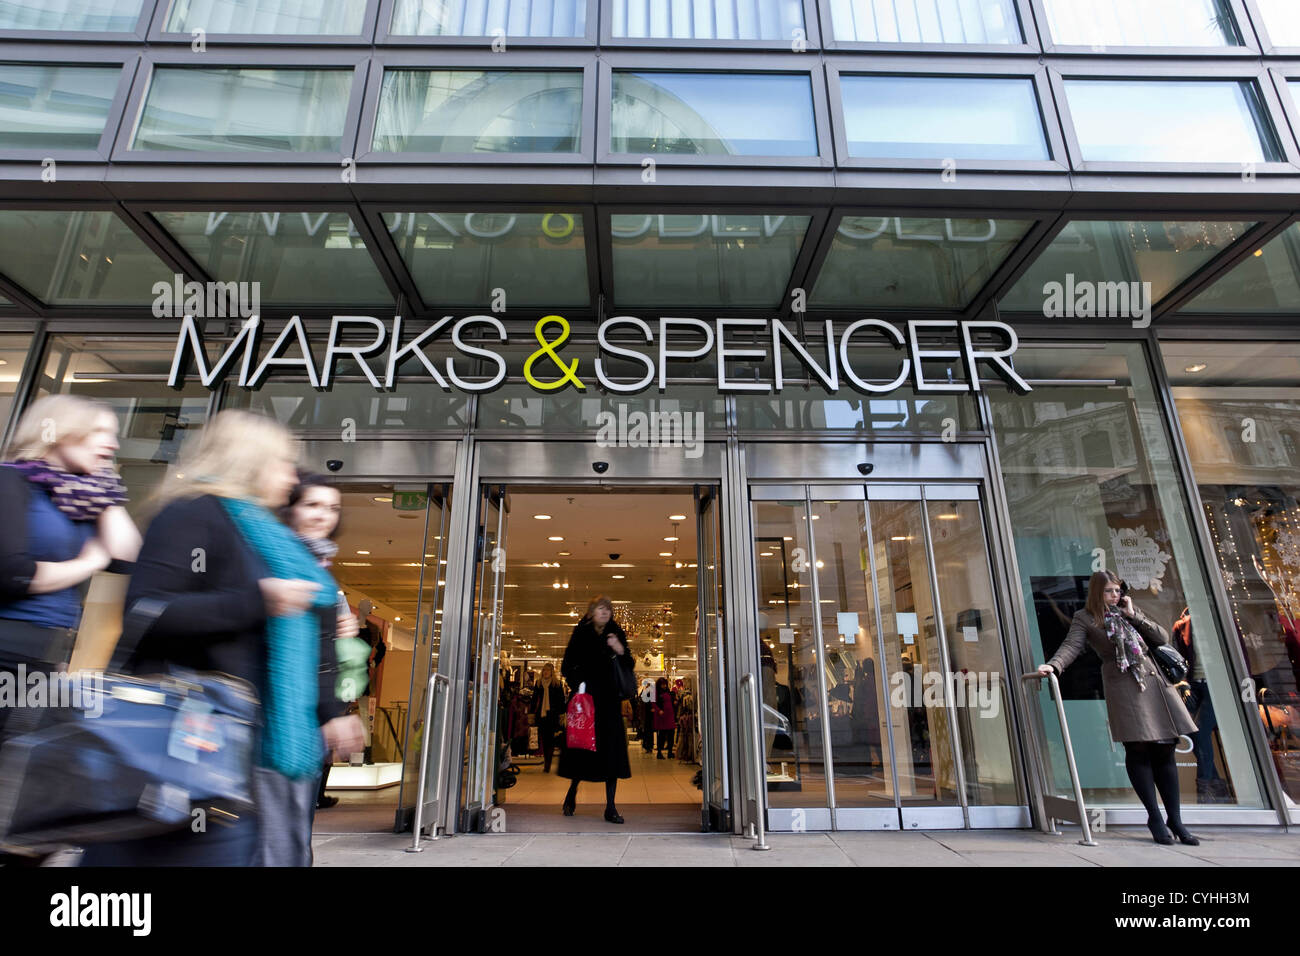 London, UK. 5/11/2012. (Pictured) People walking pass a Mark & Spencer store entrance in London ,Peter Barbe / Alamy Stock Photo